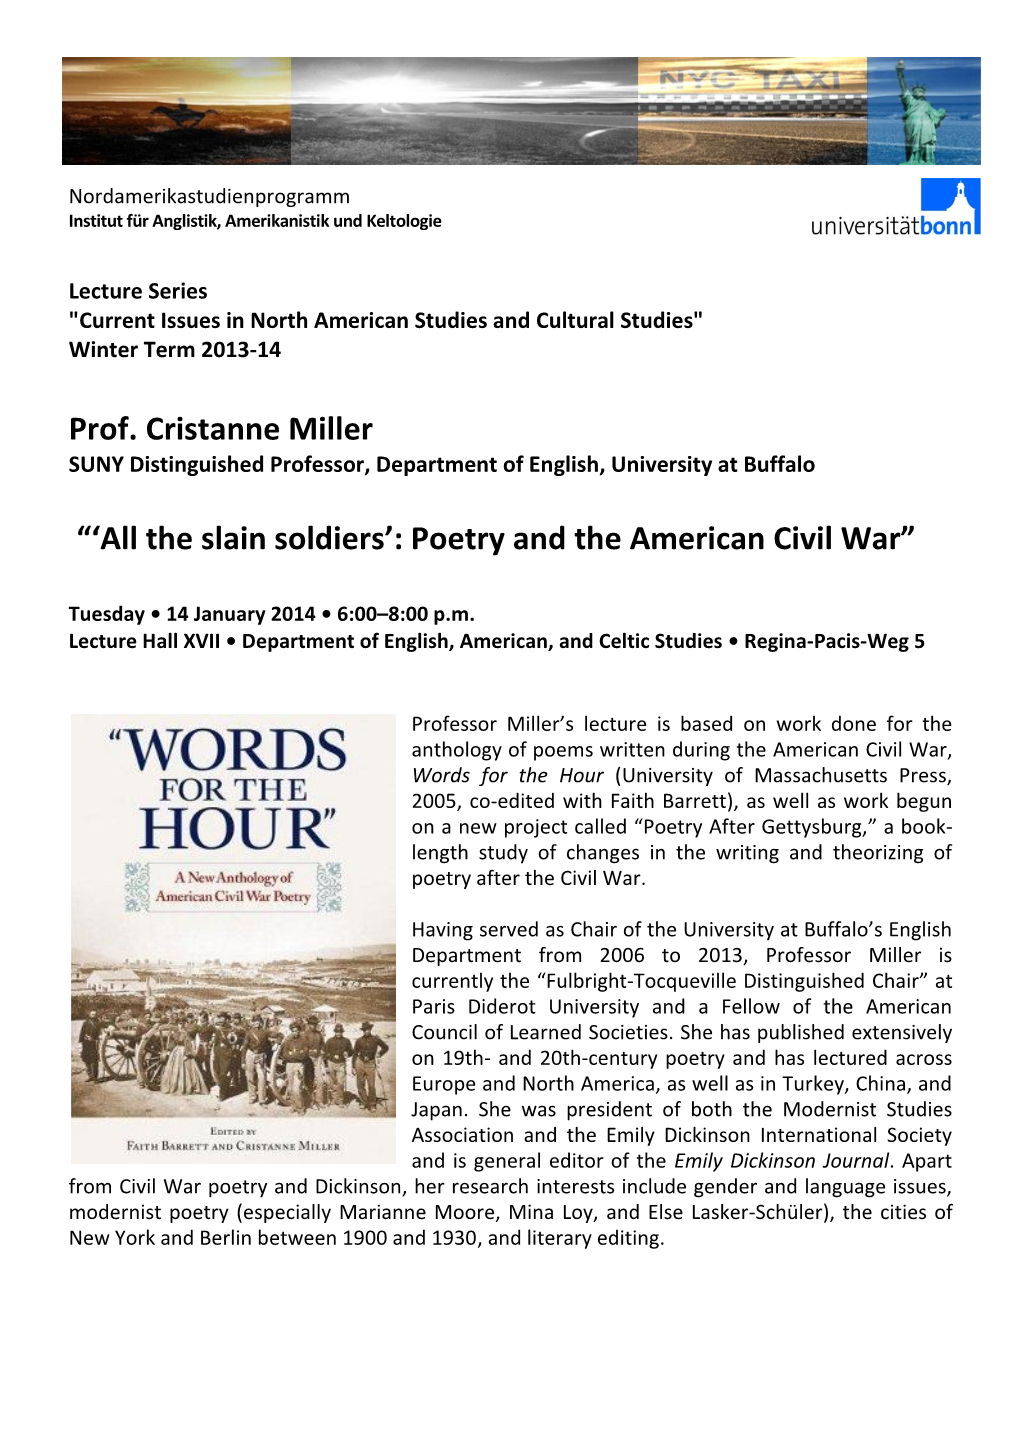 Prof. Cristanne Miller “'All the Slain Soldiers': Poetry and the American